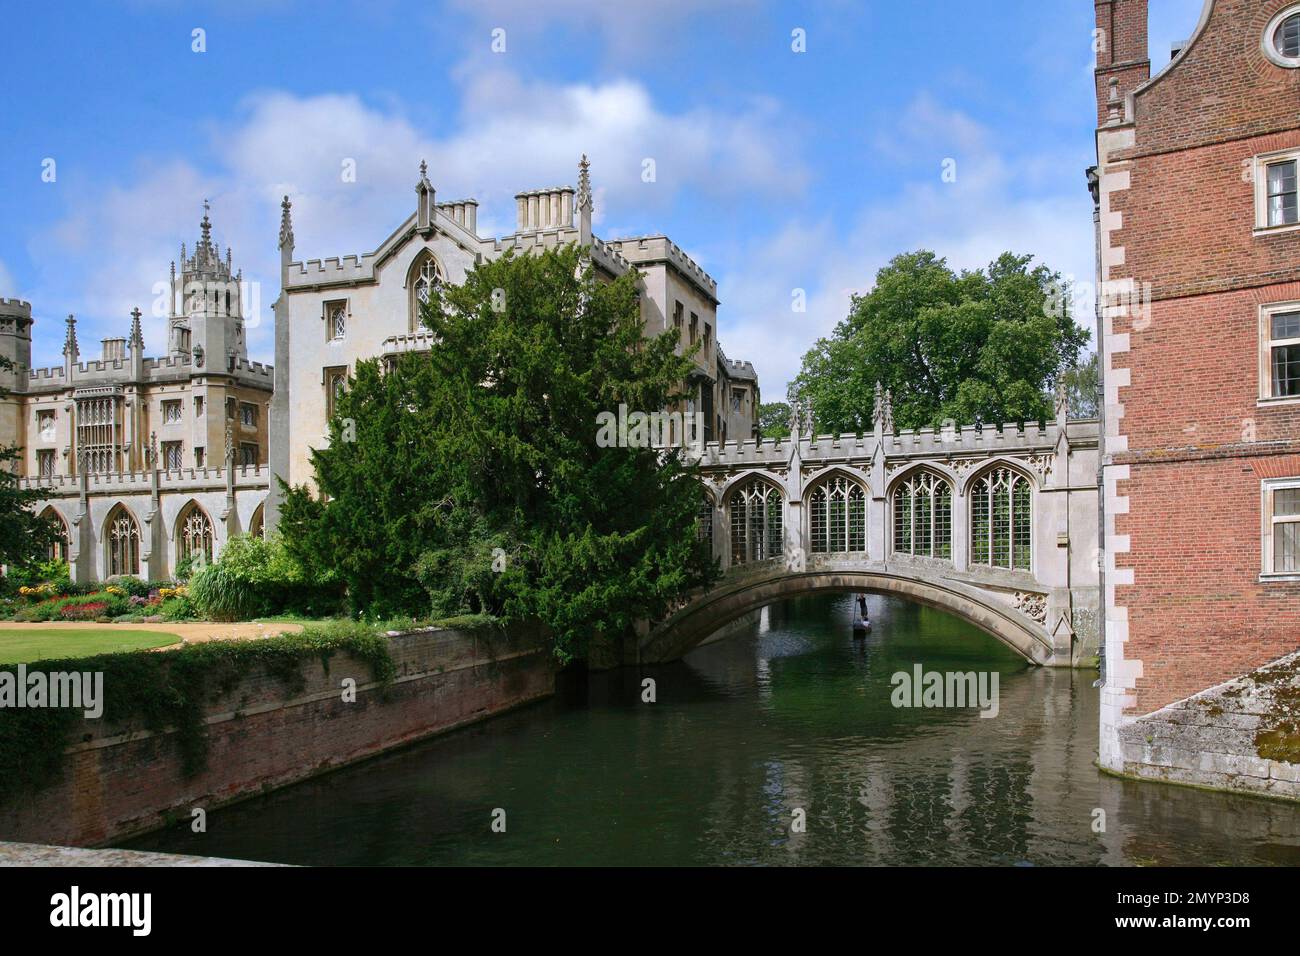 View of Cambridge University from a bridge over the River Cam, with the covered Bridge of Sighs connecting two colleges Stock Photo